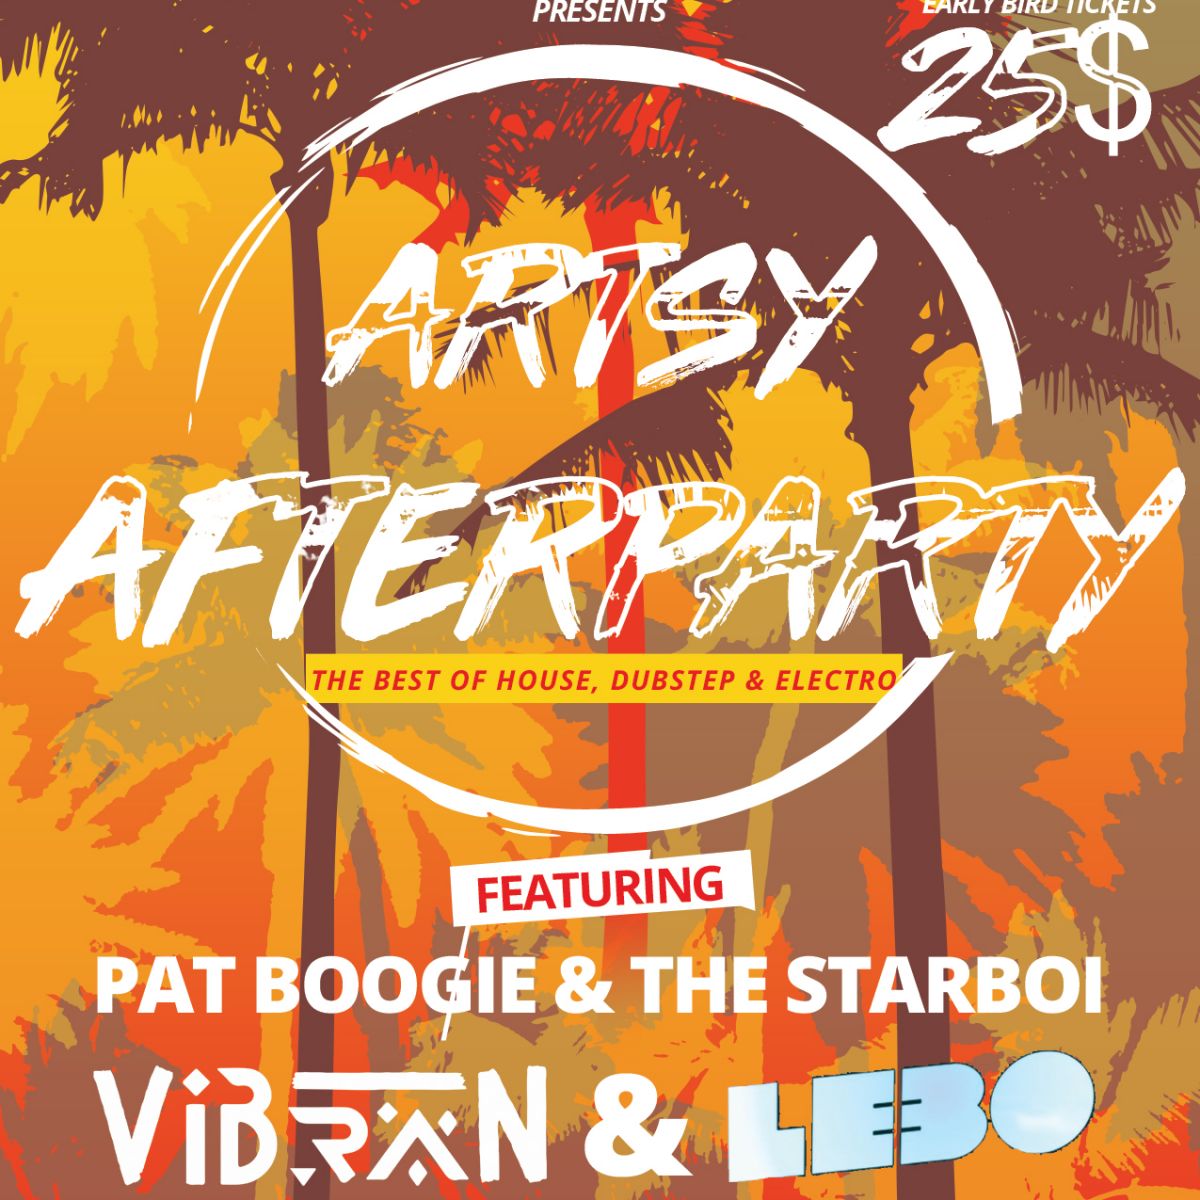 Artsy Afterparty - Saturday Aug. 6th ft. Pat Boogie, The Starboi, Viban and Le3o.